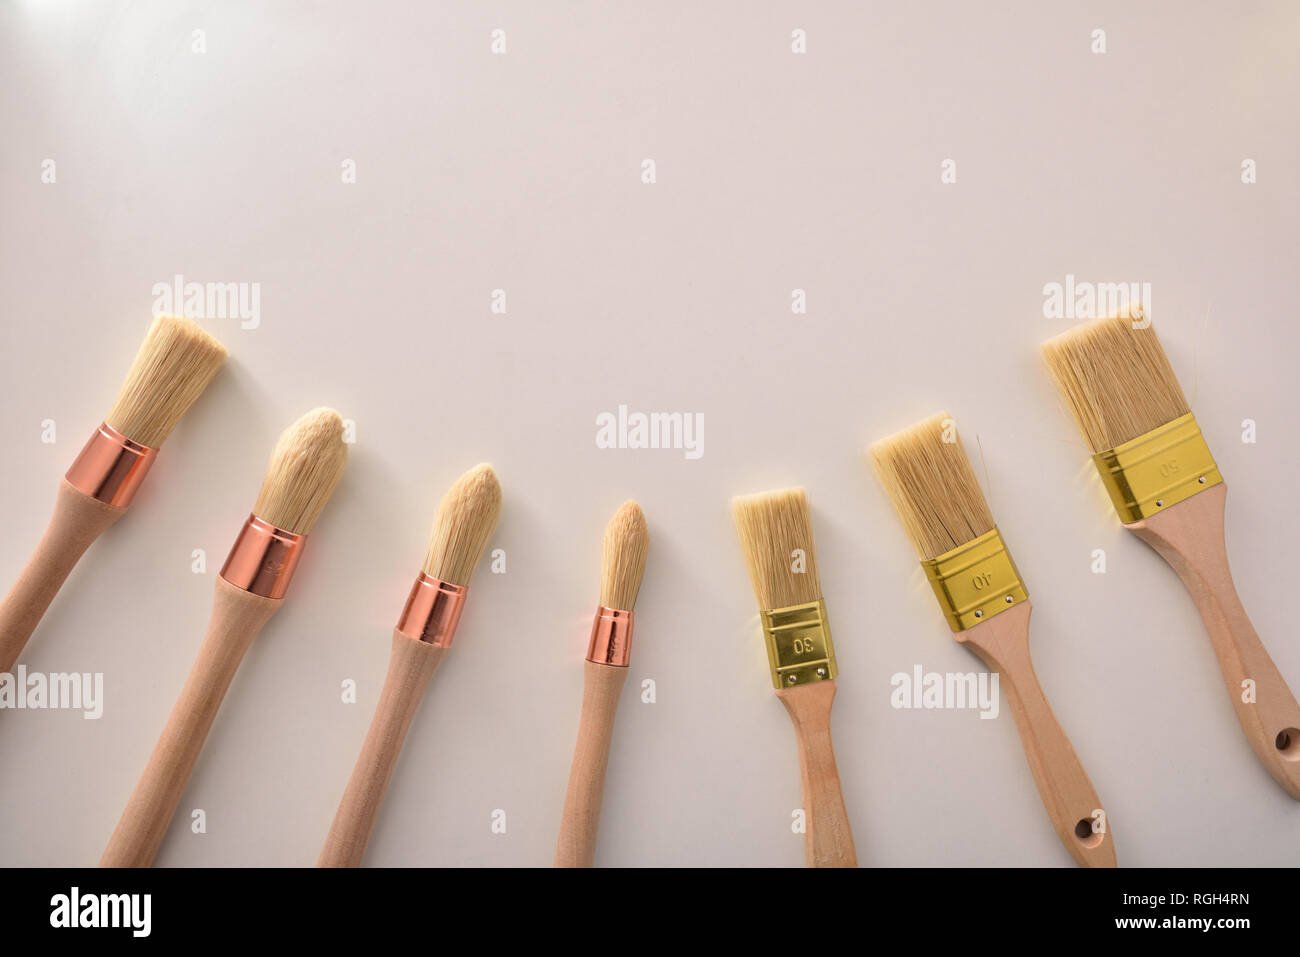 Set of paintbrushes for house painter of various sizes and shapes around on white table. Horizontal composition Stock Photo